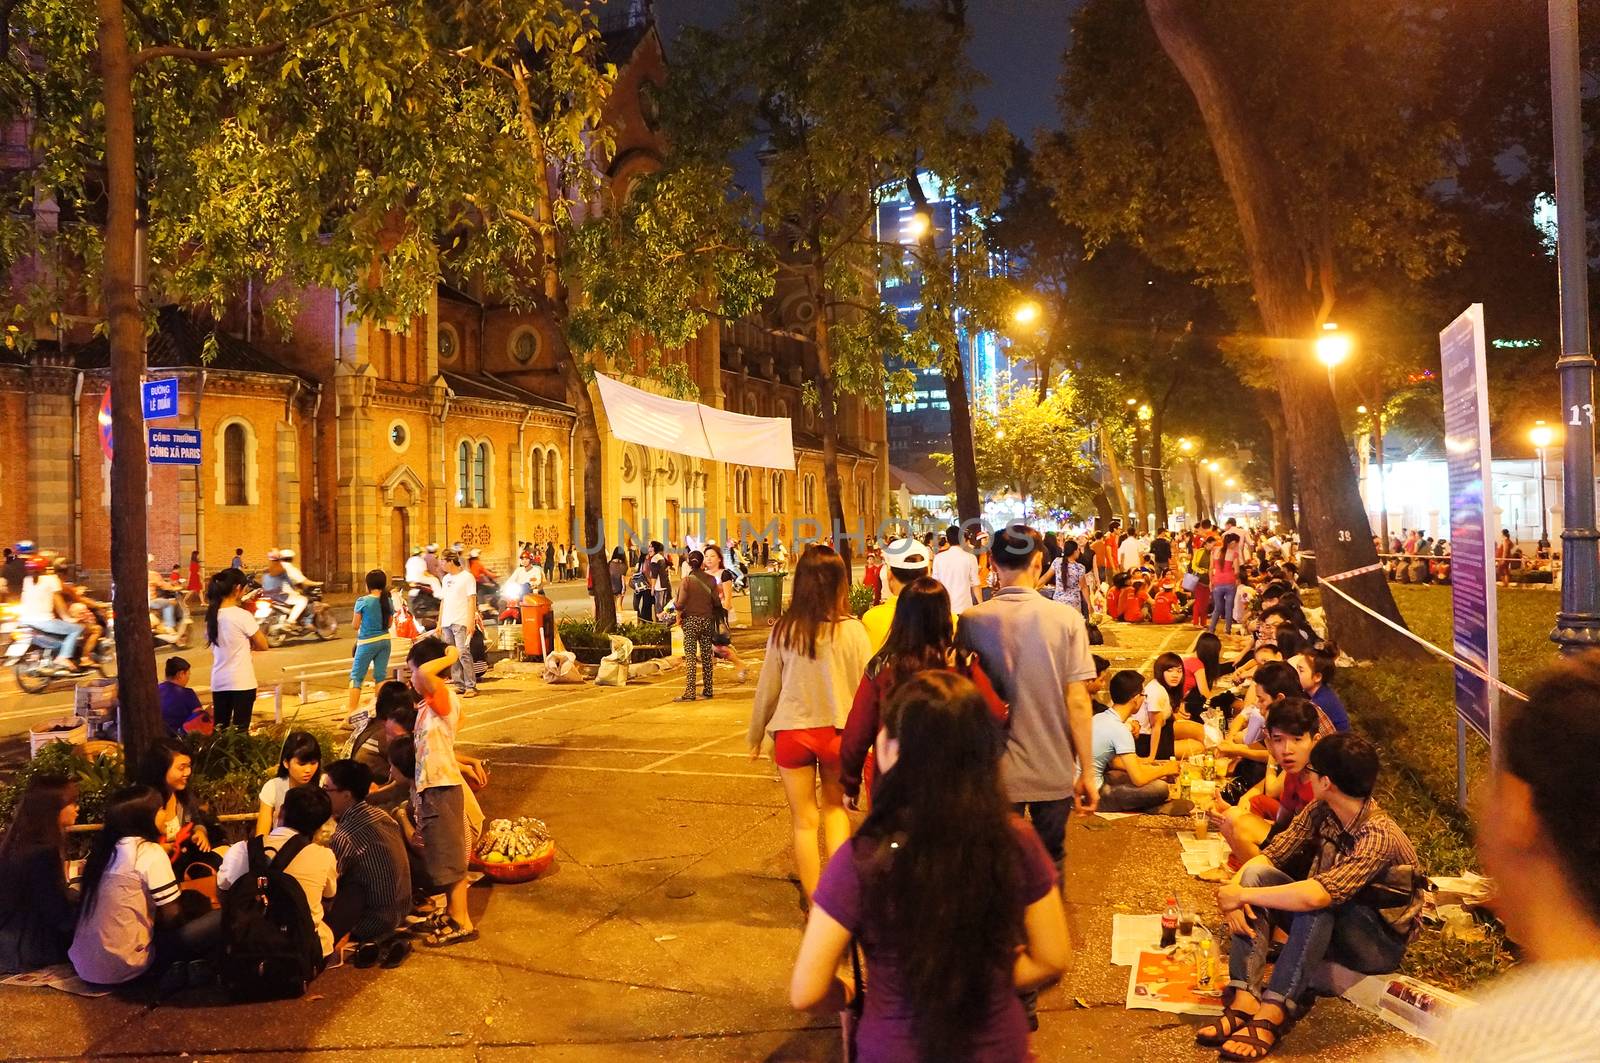 HO CHI MINH CITY, VIET NAM- DEC 24: Crowded atmosphere at Duc Ba Cathedral at Xmas night, under yellow lamp, young people sit on pavement, enjoy bet cafe, is youth lifestyle, Vietnam, Dec 24, 2014